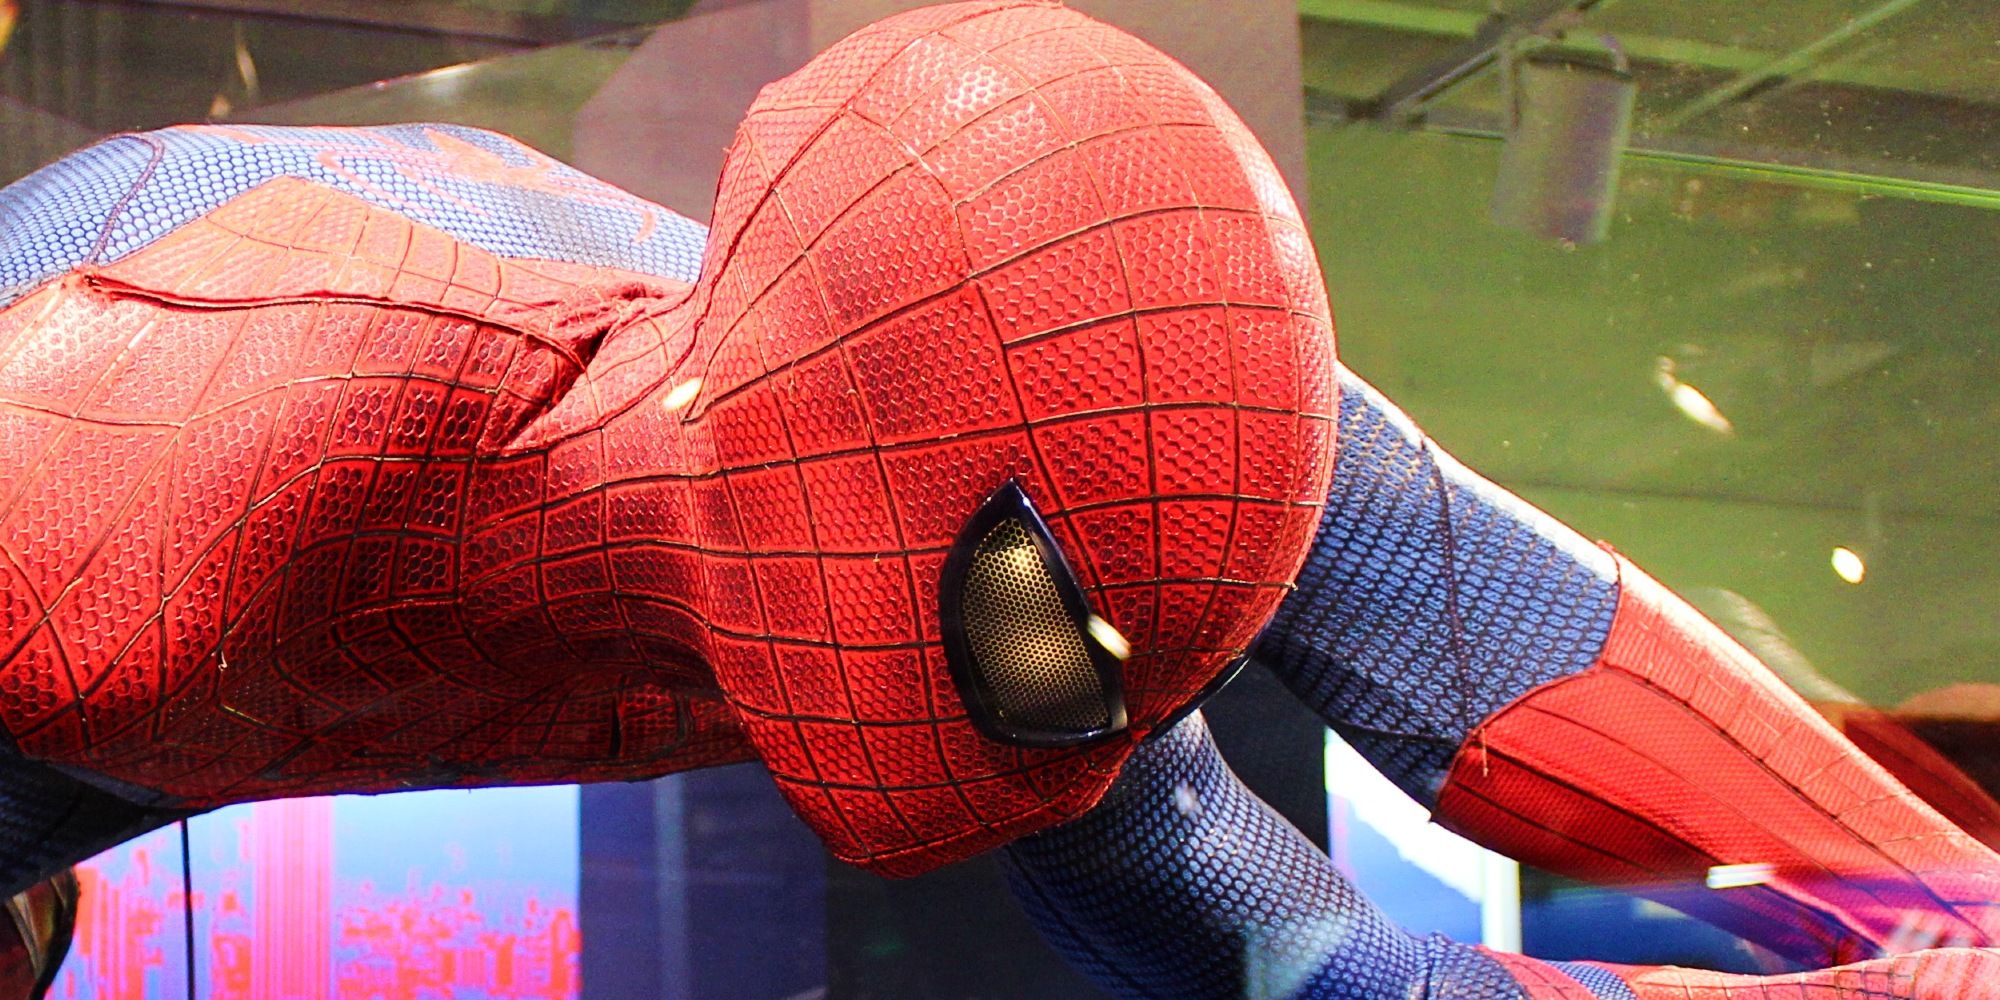 Andrew Garfield's Amazing Spider-Man Suit And Web-Shooters Now On Display